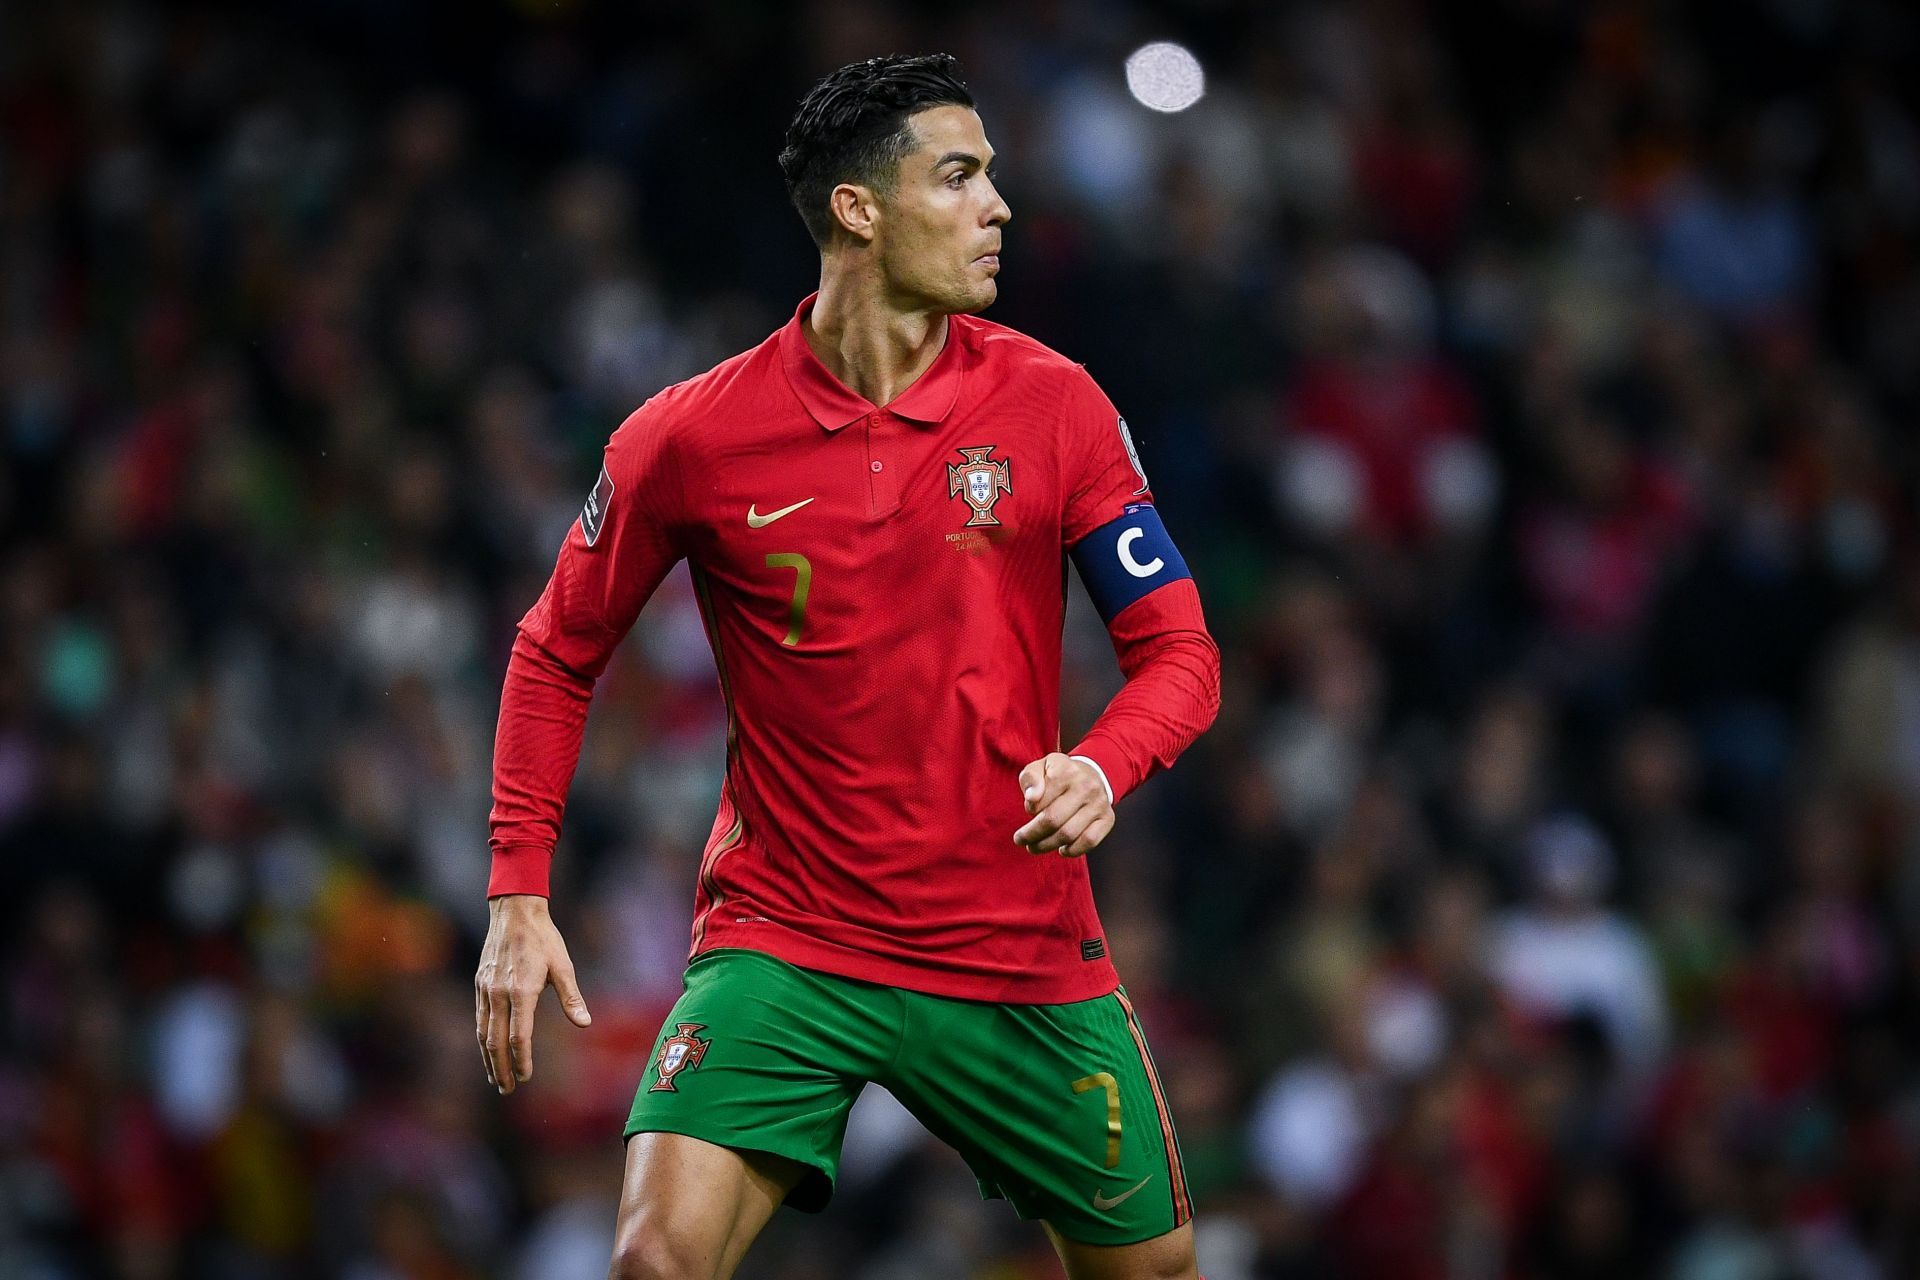 Ronaldo is leading the line for his nation against North Macedonia